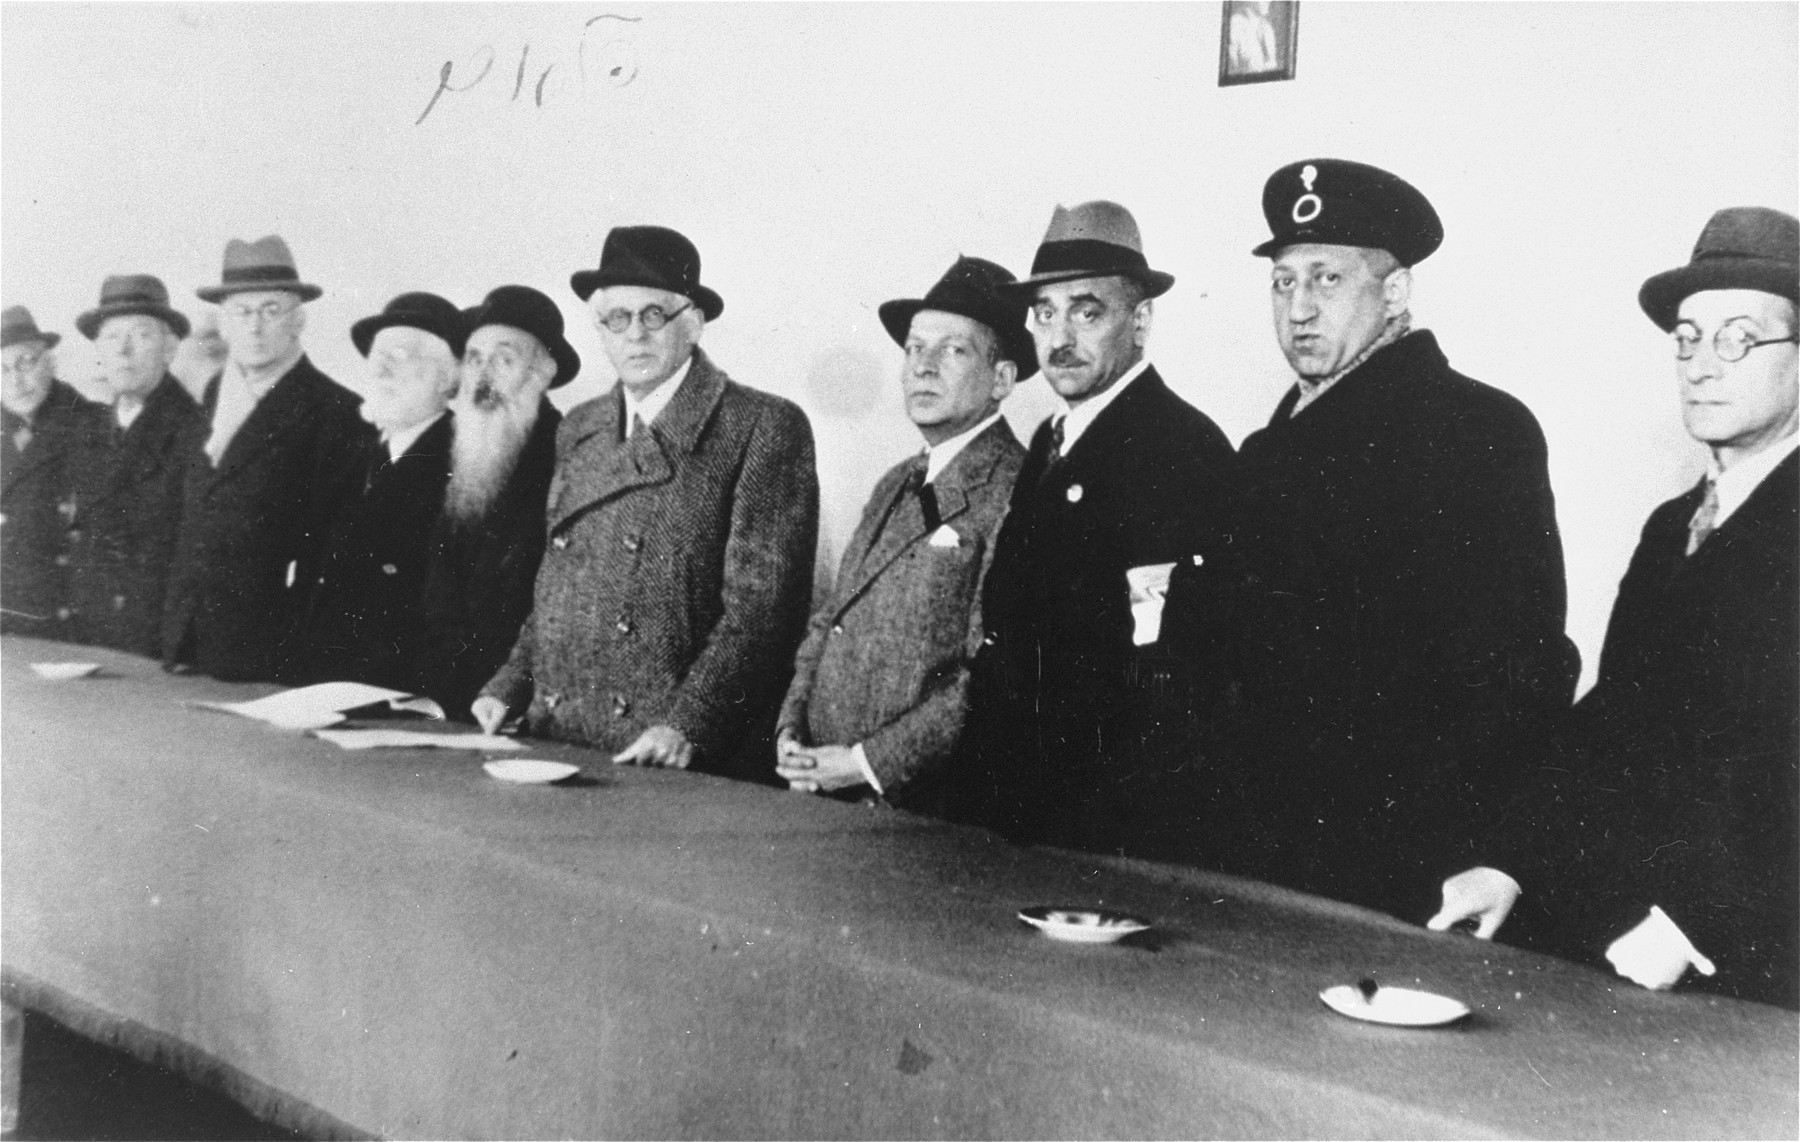 Members of the Lodz ghetto Jewish council stand behind a long table.

Among those pictured are Mordechai Chaim Rumkowski (fifth from the right), Rabbi Yosif Fajner (sixth from the right), Leon Rozenblat (third from the right), Dr. Leon Szykier (second from the right) and Max Szczesliwy.